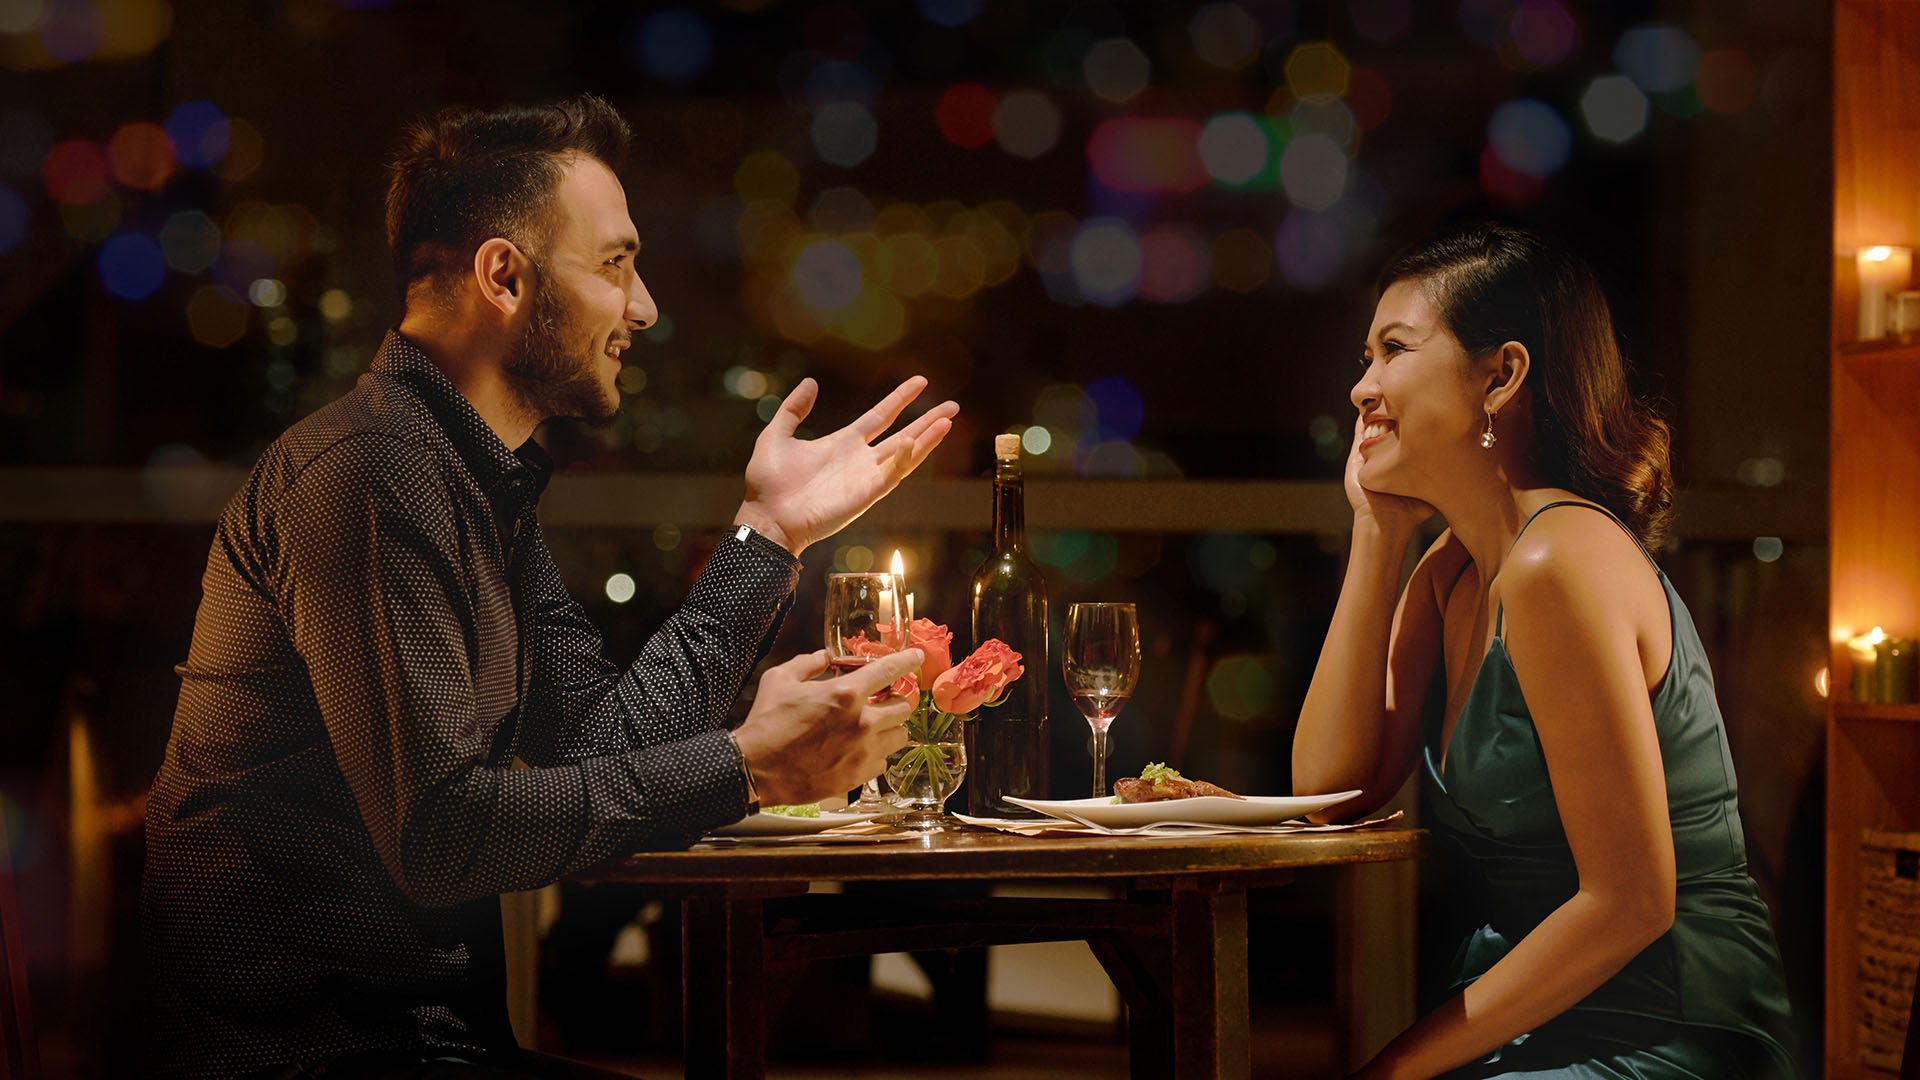 Brunette man and Asian woman at a romantic dinner date. The woman is smiling while looking at the man who is talking.